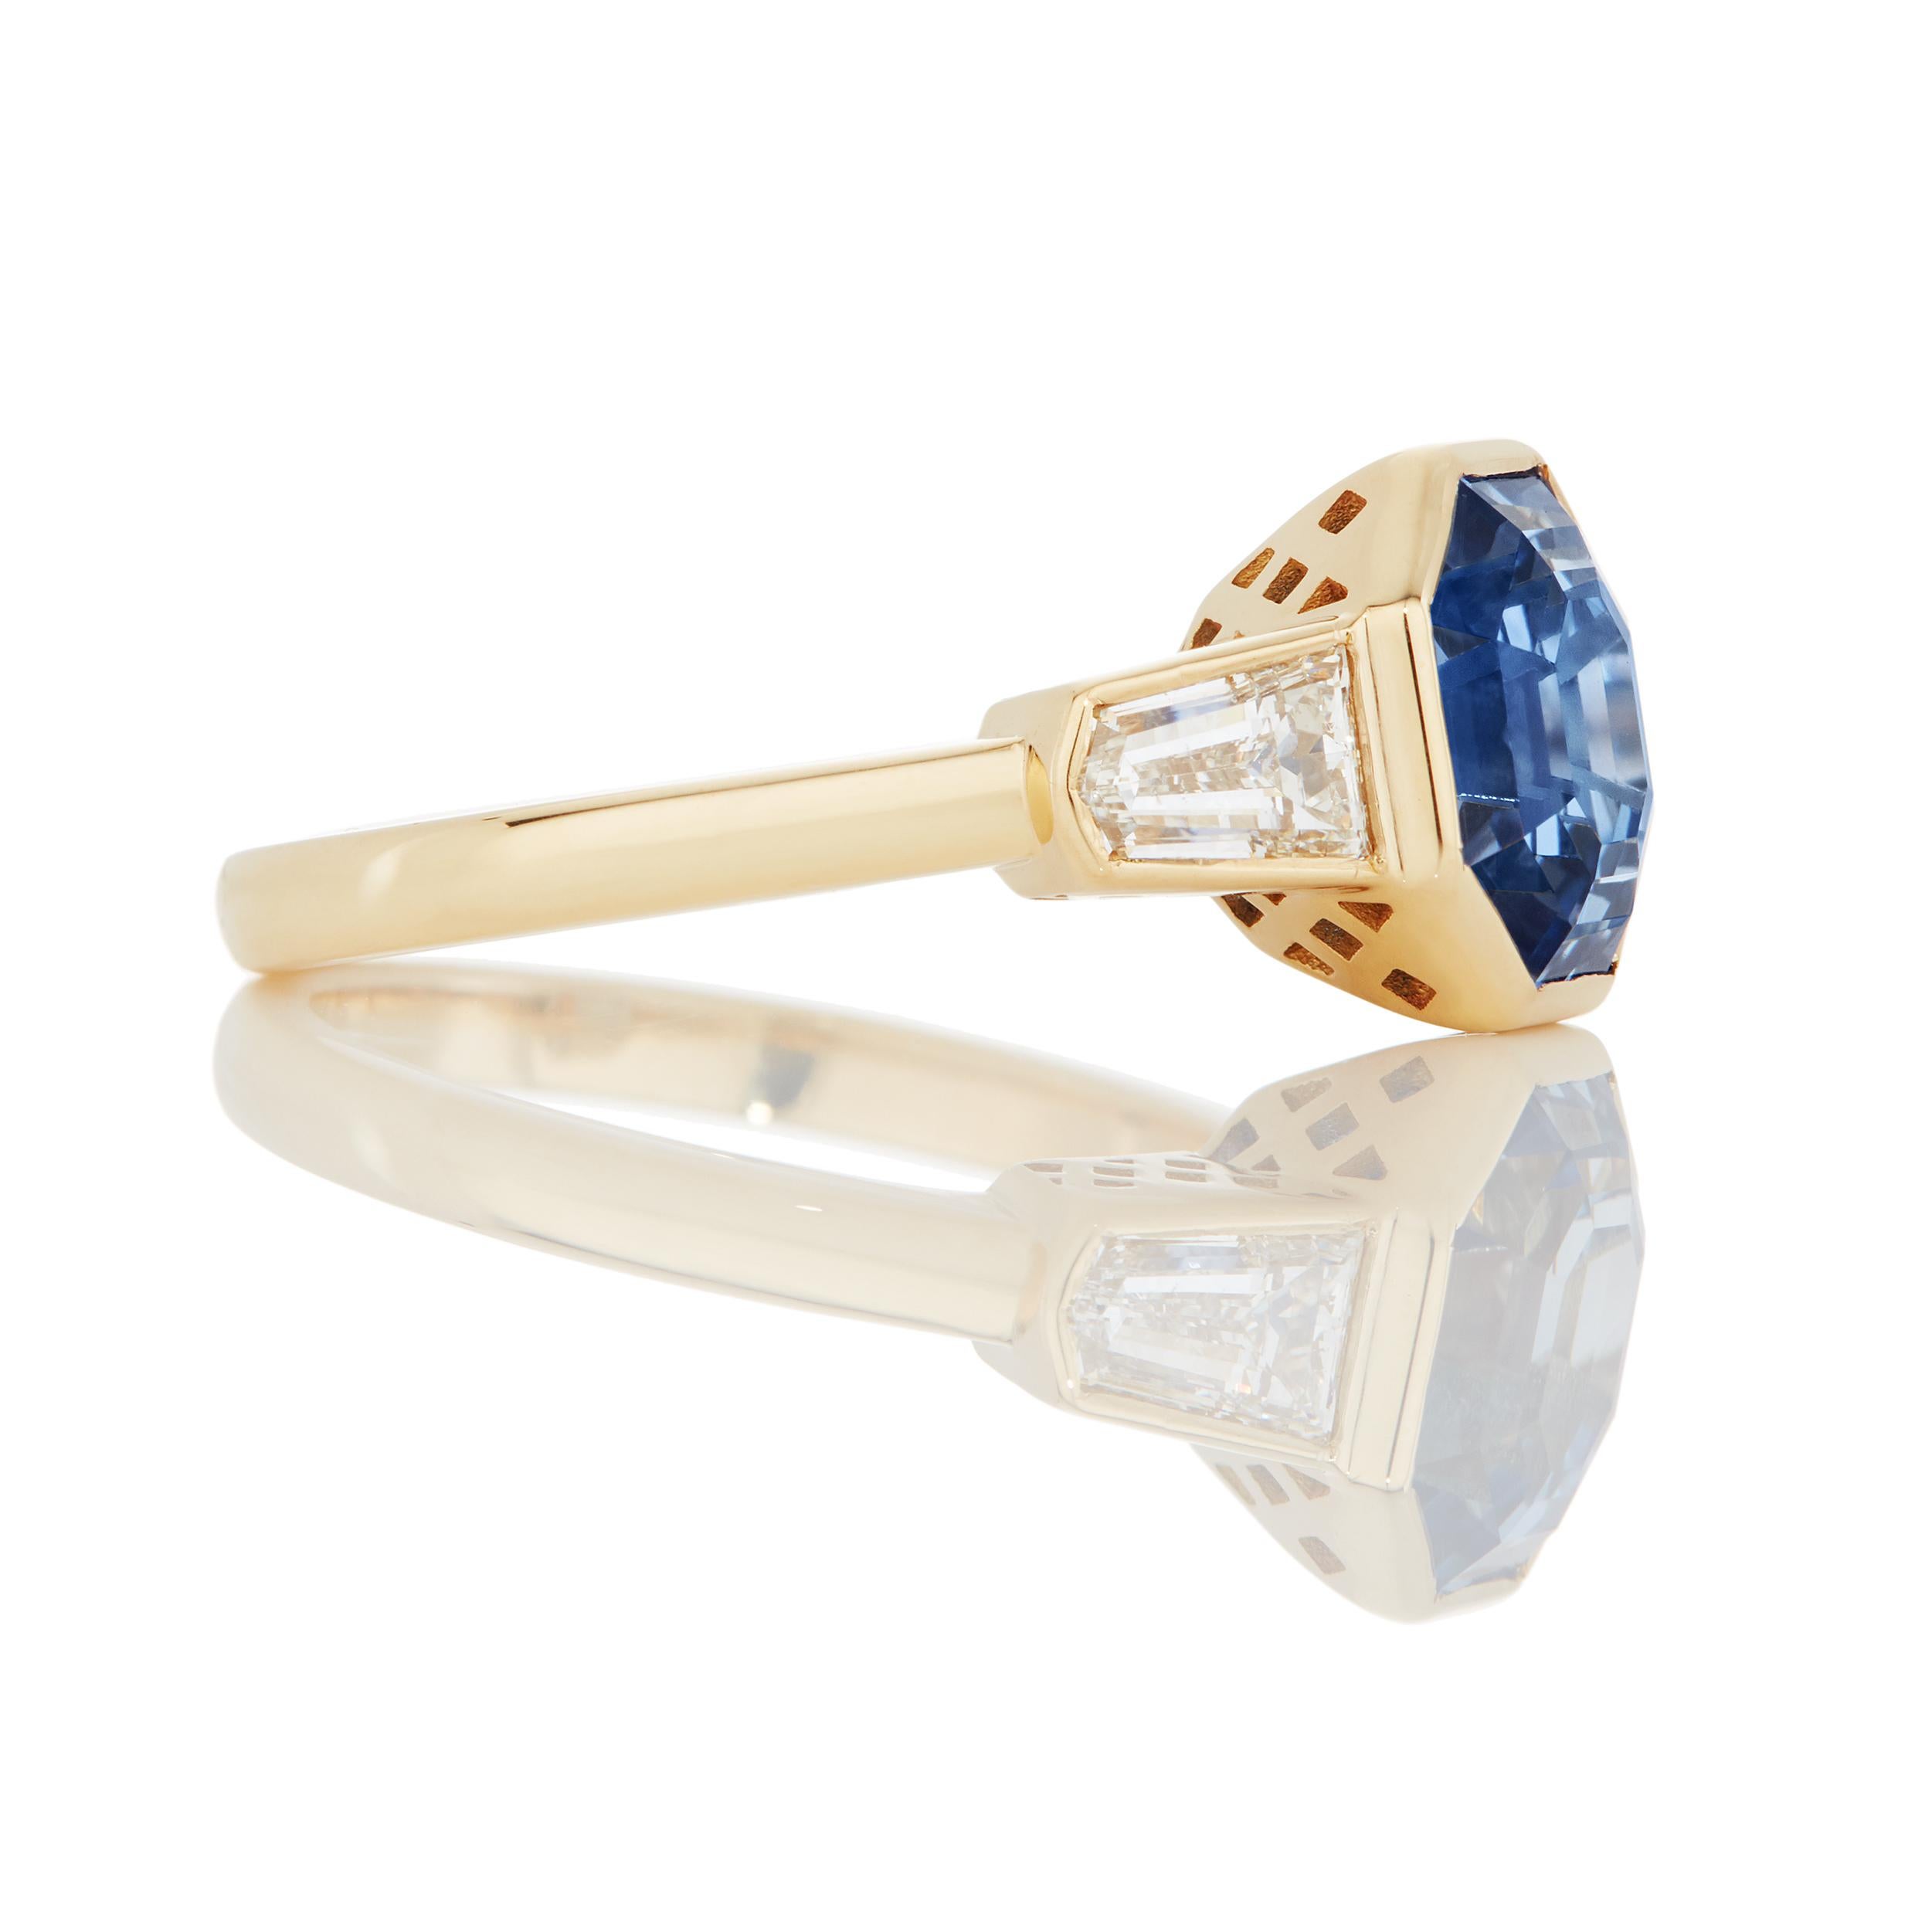 Overall description:

Ring Details
AGL Report # 1102400

     Octagon-Shaped Blue Sapphire weighing ..
Step Cut Profile Diamonds weighing 0.14 carats

Total Gem Weight: 4.21

Ring Size: 5.5

Measurements:
     Length: 24.1 mm
     Weight: 4.8 g
